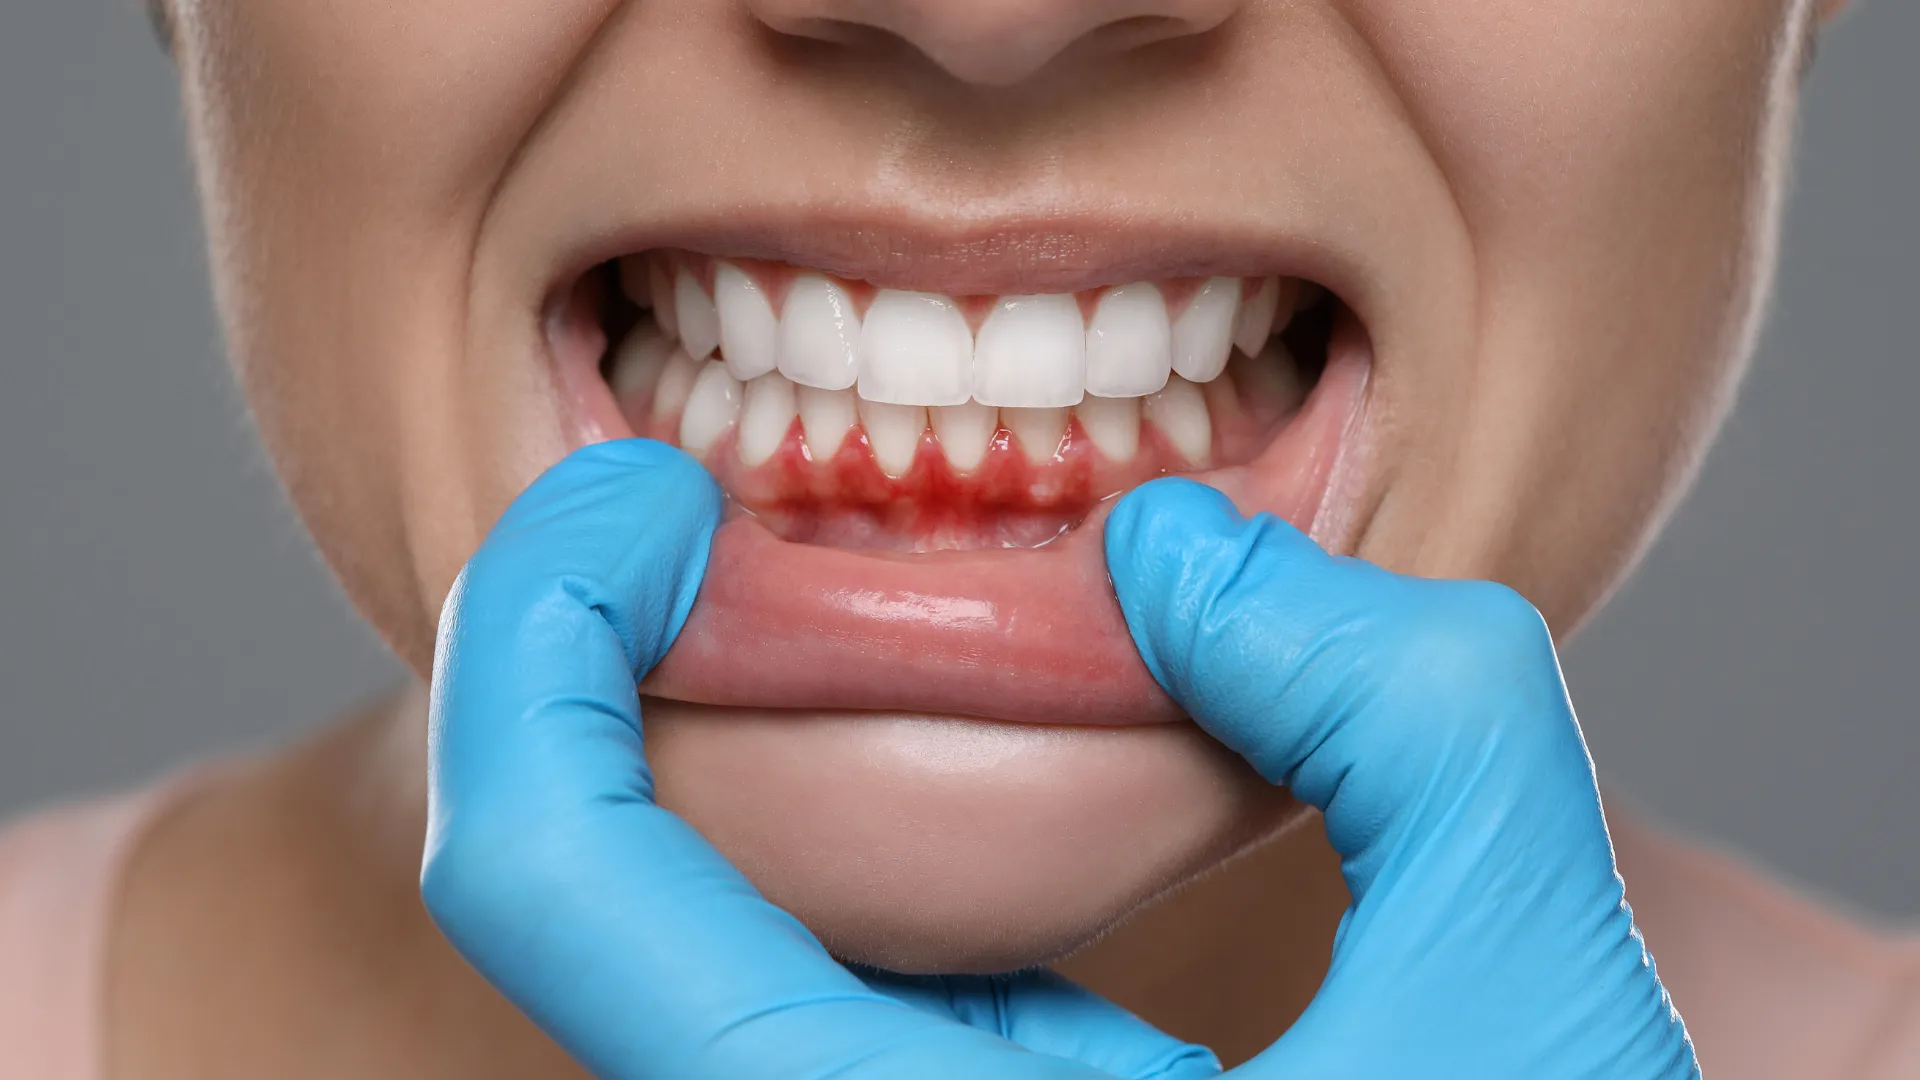 Close-up of red, swollen gums, a common symptom of early stage gum disease.